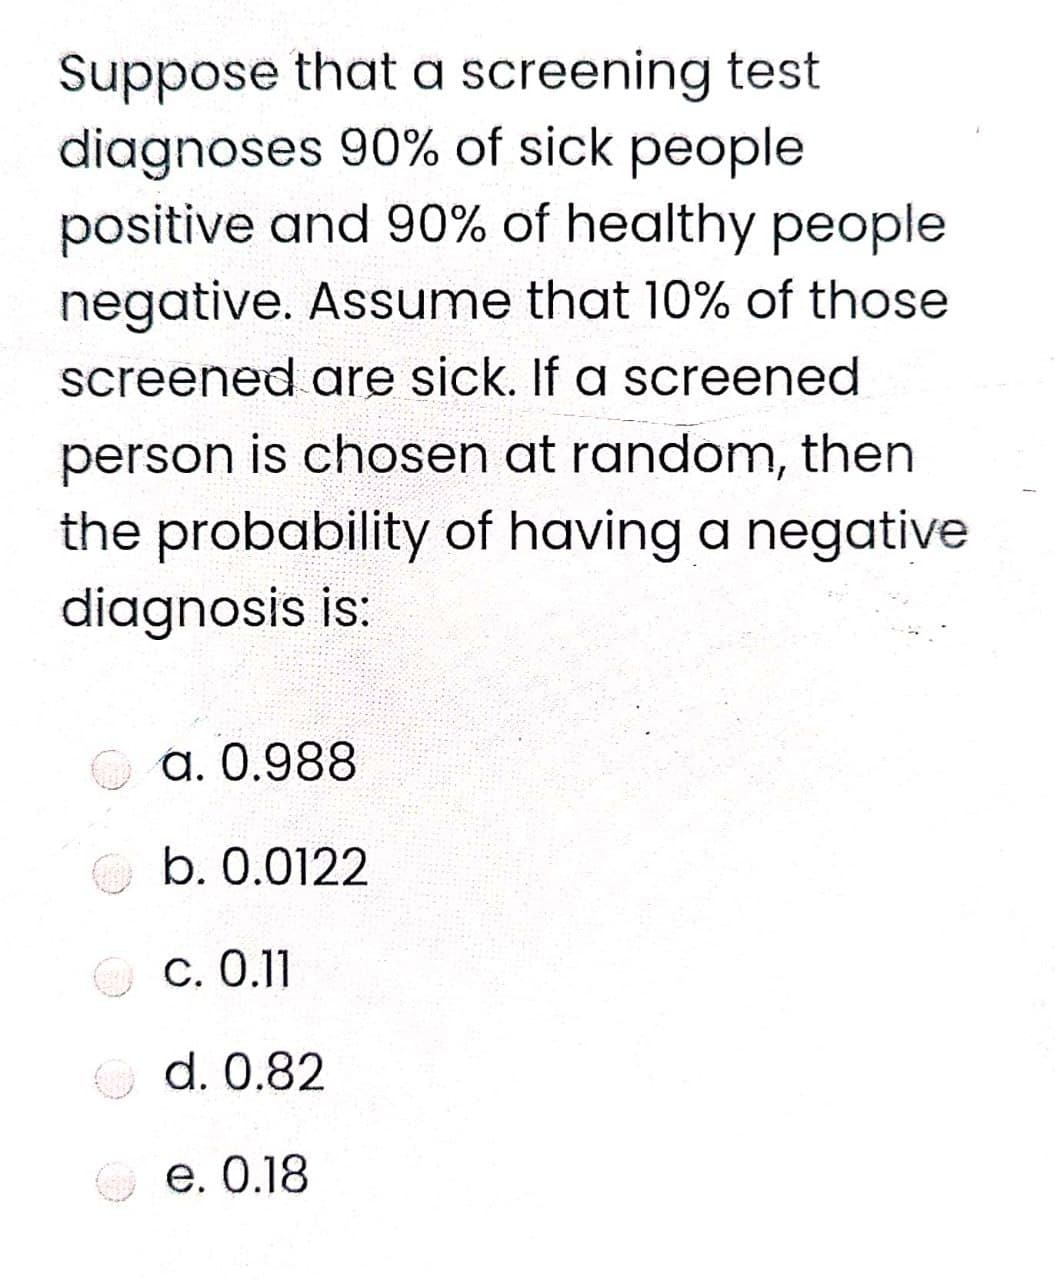 Suppose that a screening test
diagnoses 90% of sick people
positive and 90% of healthy people
negative. Assume that 10% of those
screened are sick. If a screened
person is chosen at random, then
the probability of having a negative
diagnosis is:
a. 0.988
b. 0.0122
C. 0.11
O d. 0.82
e. 0.18
